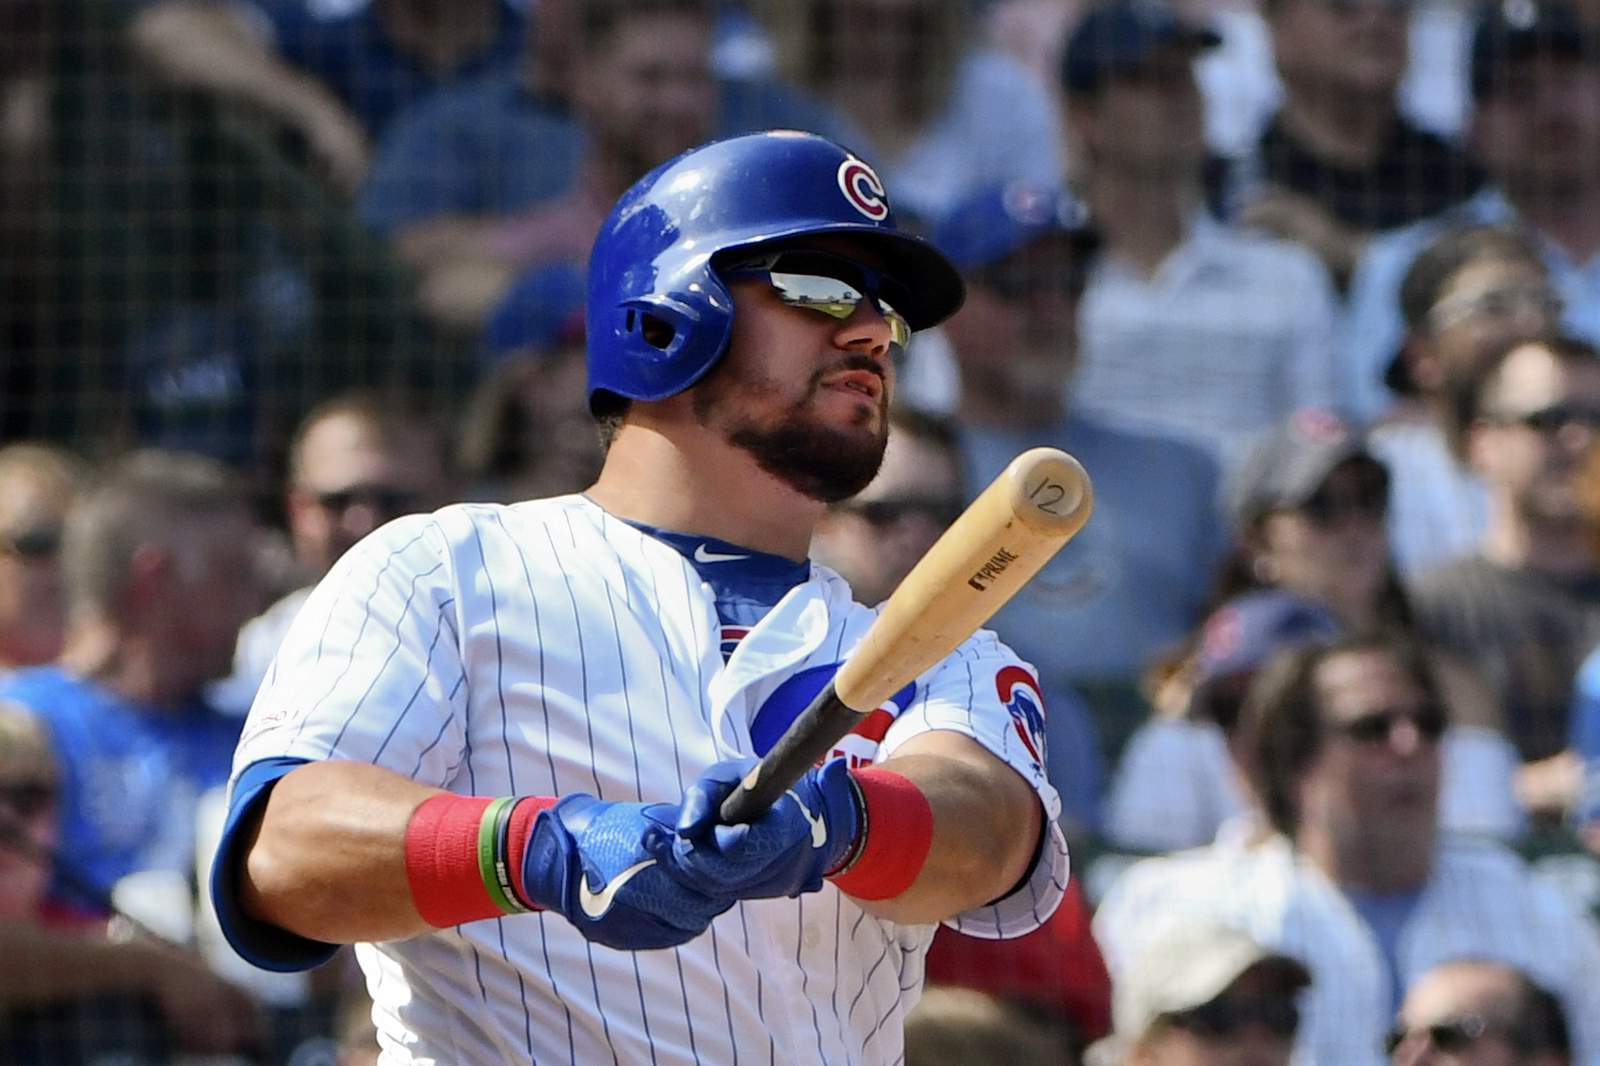 Schwarber signs $10M deal with Nats, reunites with Martinez